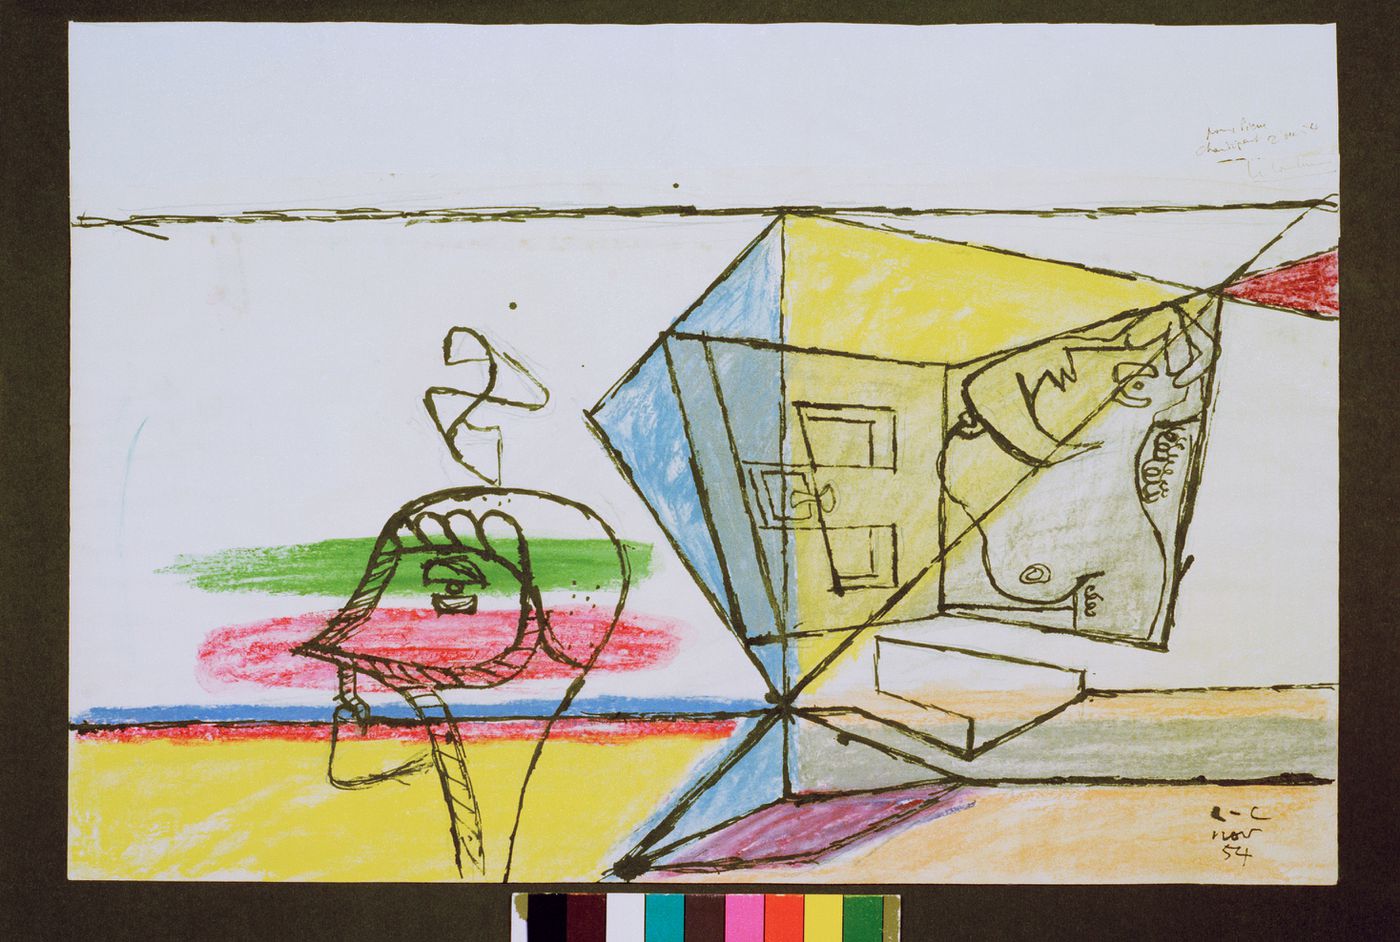 Photographs of a painting by Le Corbusier